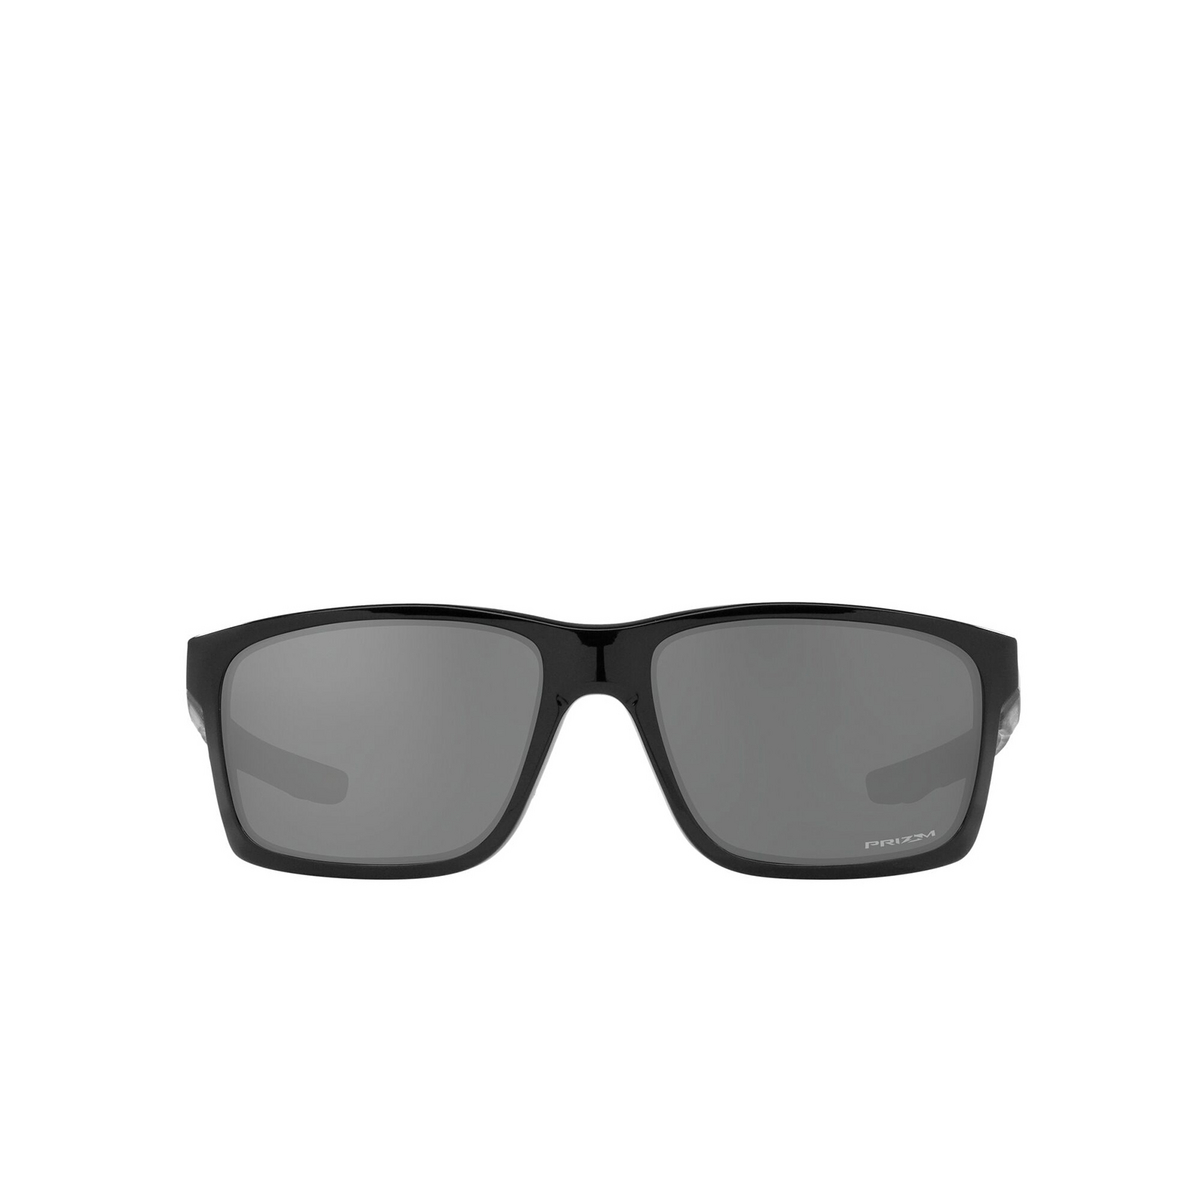 Oakley MAINLINK Sunglasses 926448 Polished Black - front view